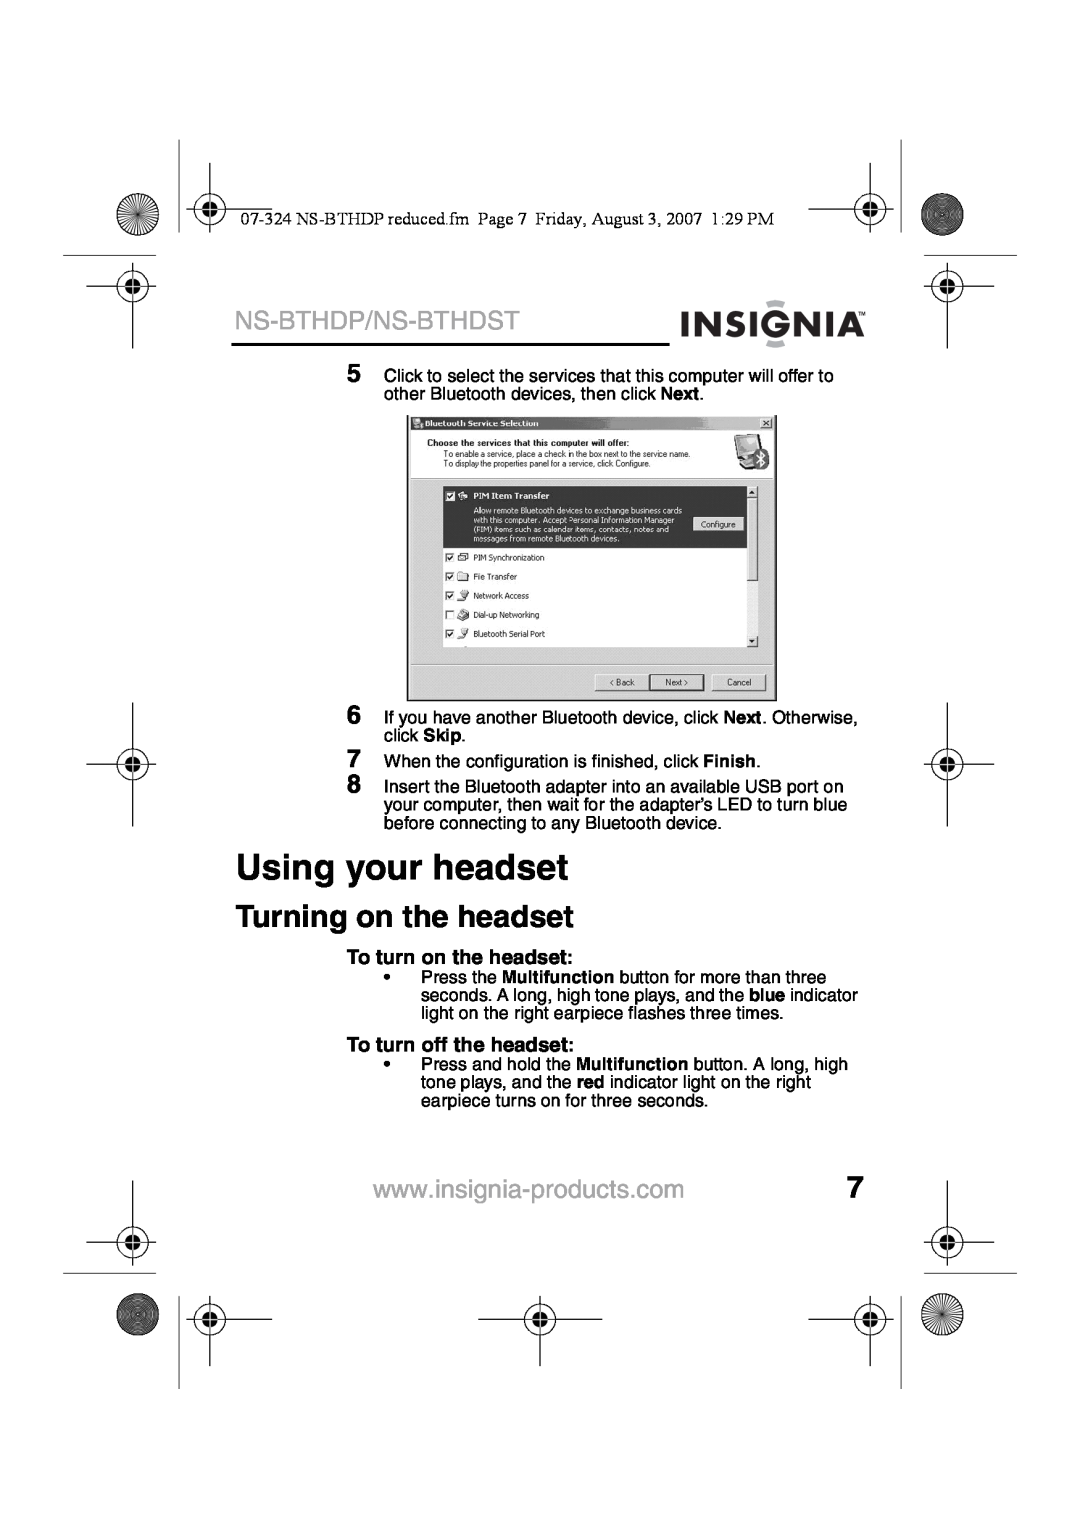 Insignia NS-BTHDST manual Using your headset, Turning on the headset, Ns-Bthdp/Ns-Bthdst, To turn on the headset 